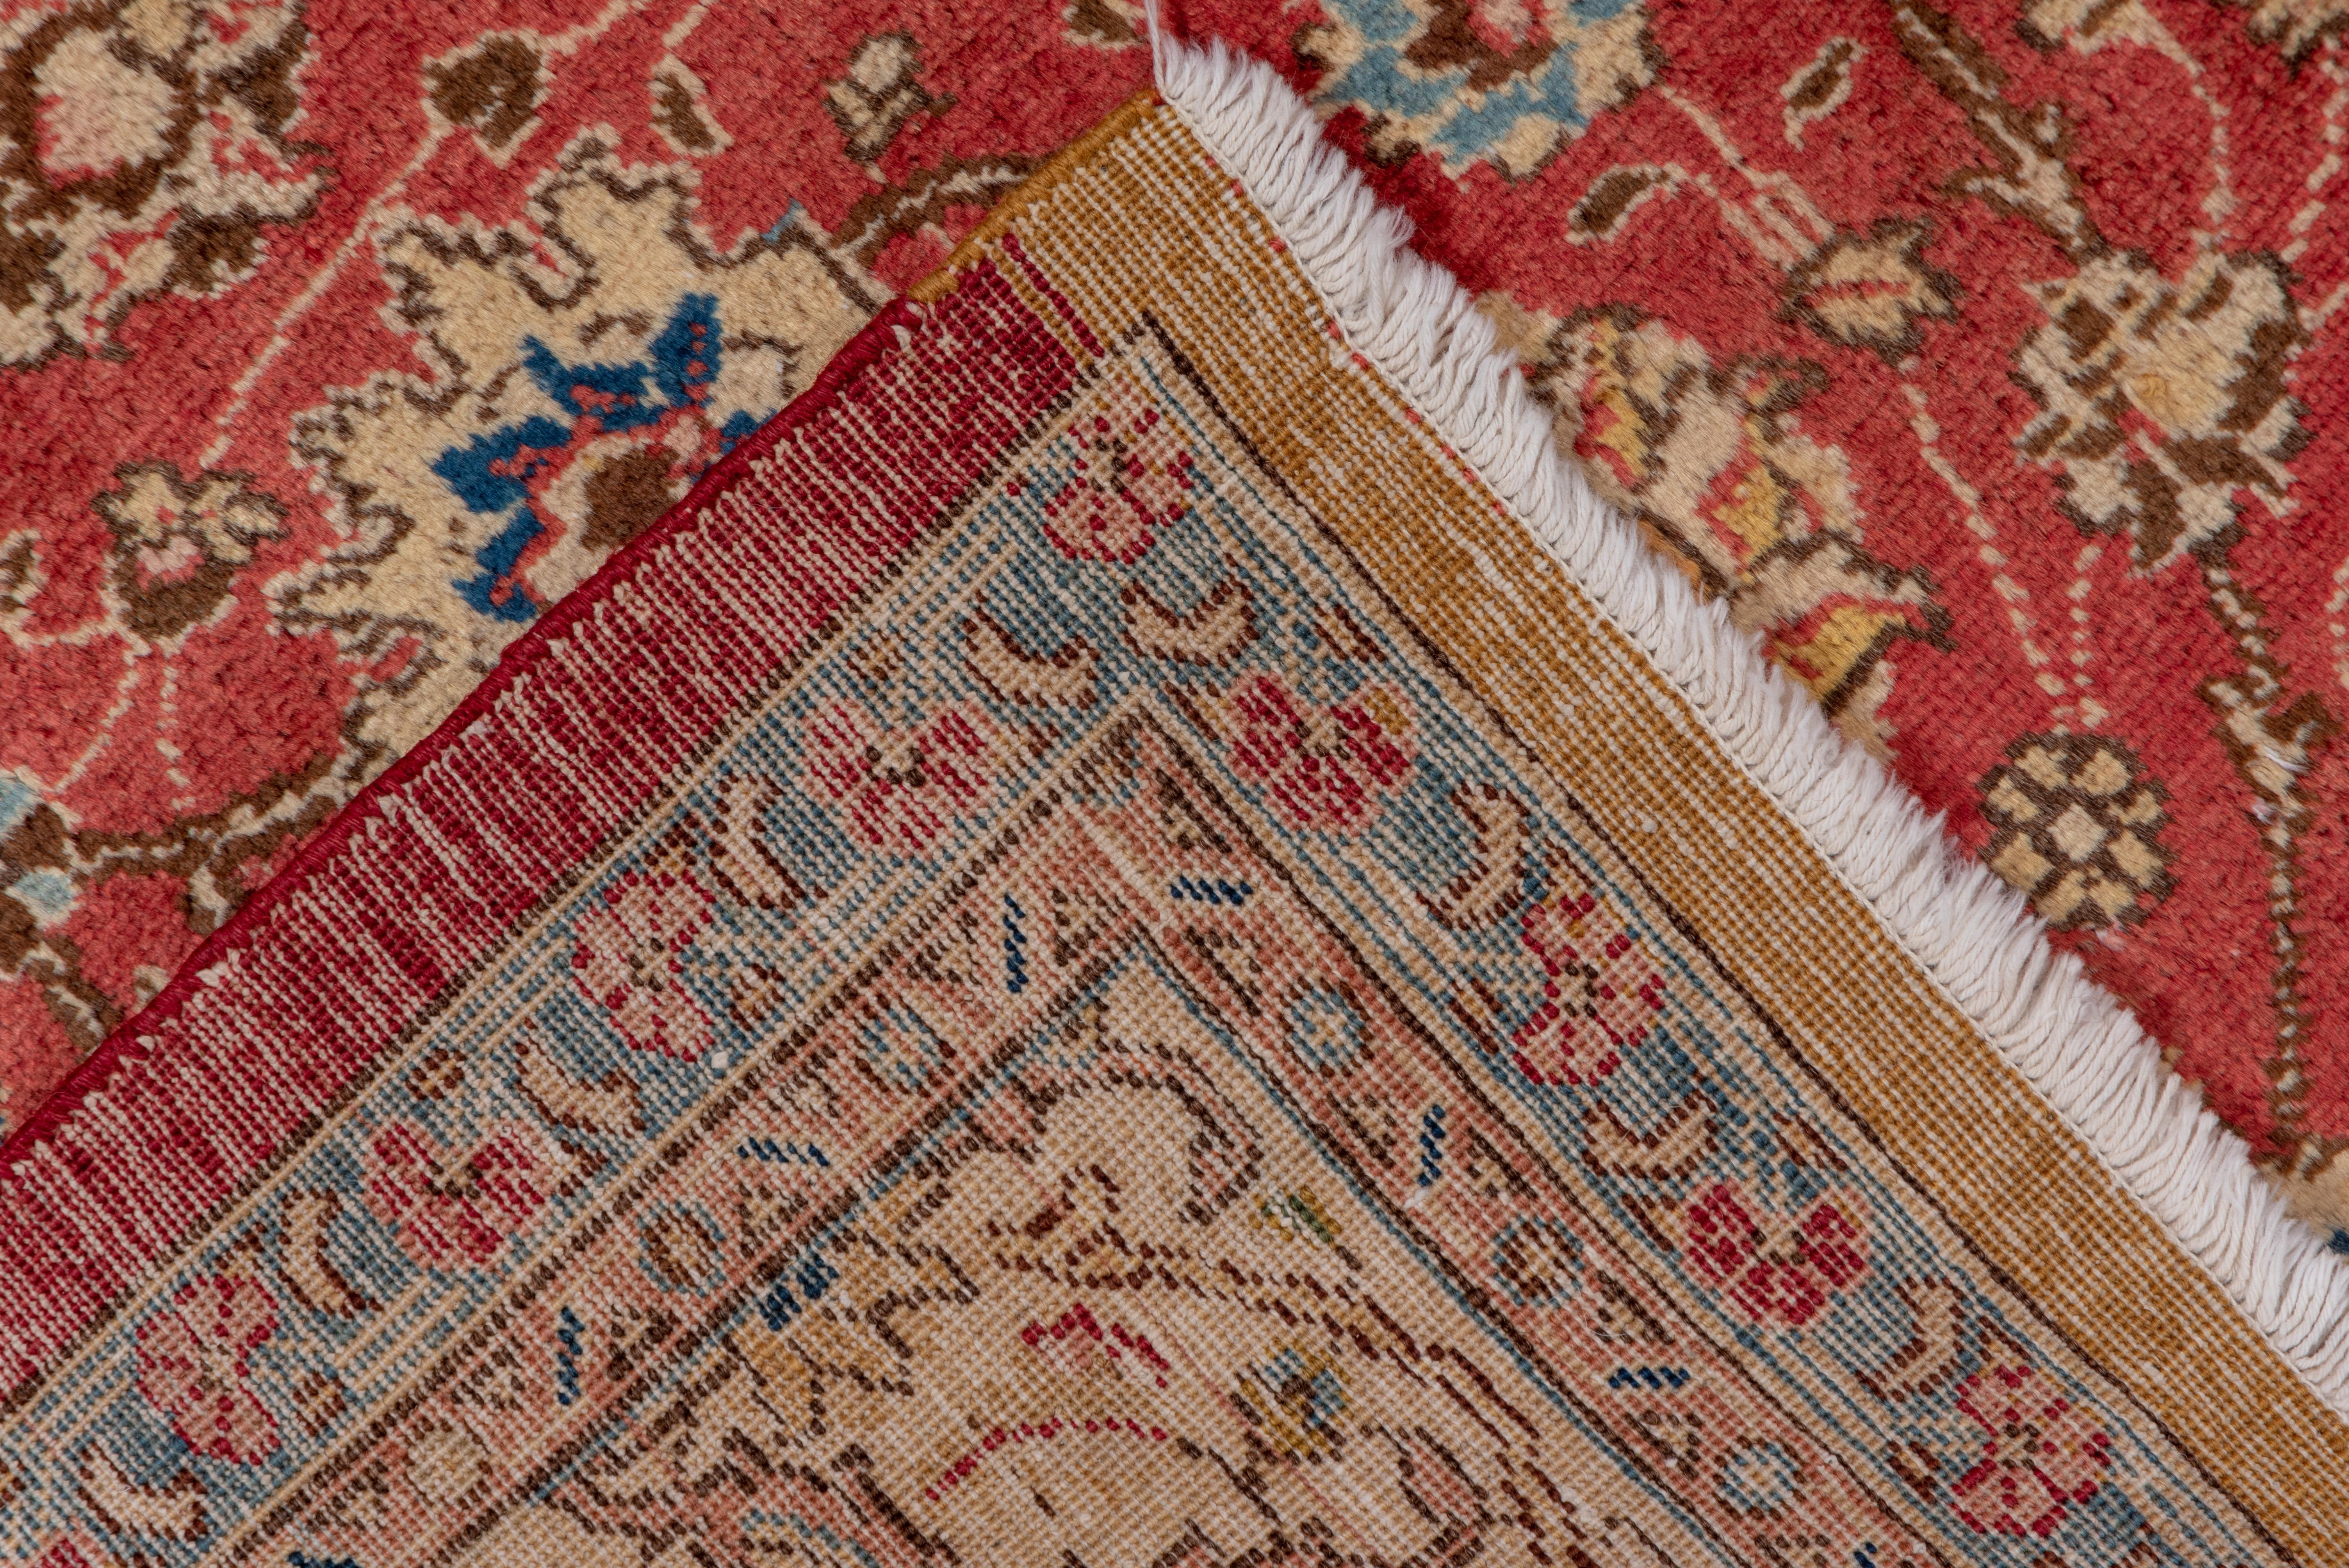 Hand-Knotted Antique Persian Tabriz Rug, Red Floral Field with Blue Accents, circa 1940s For Sale